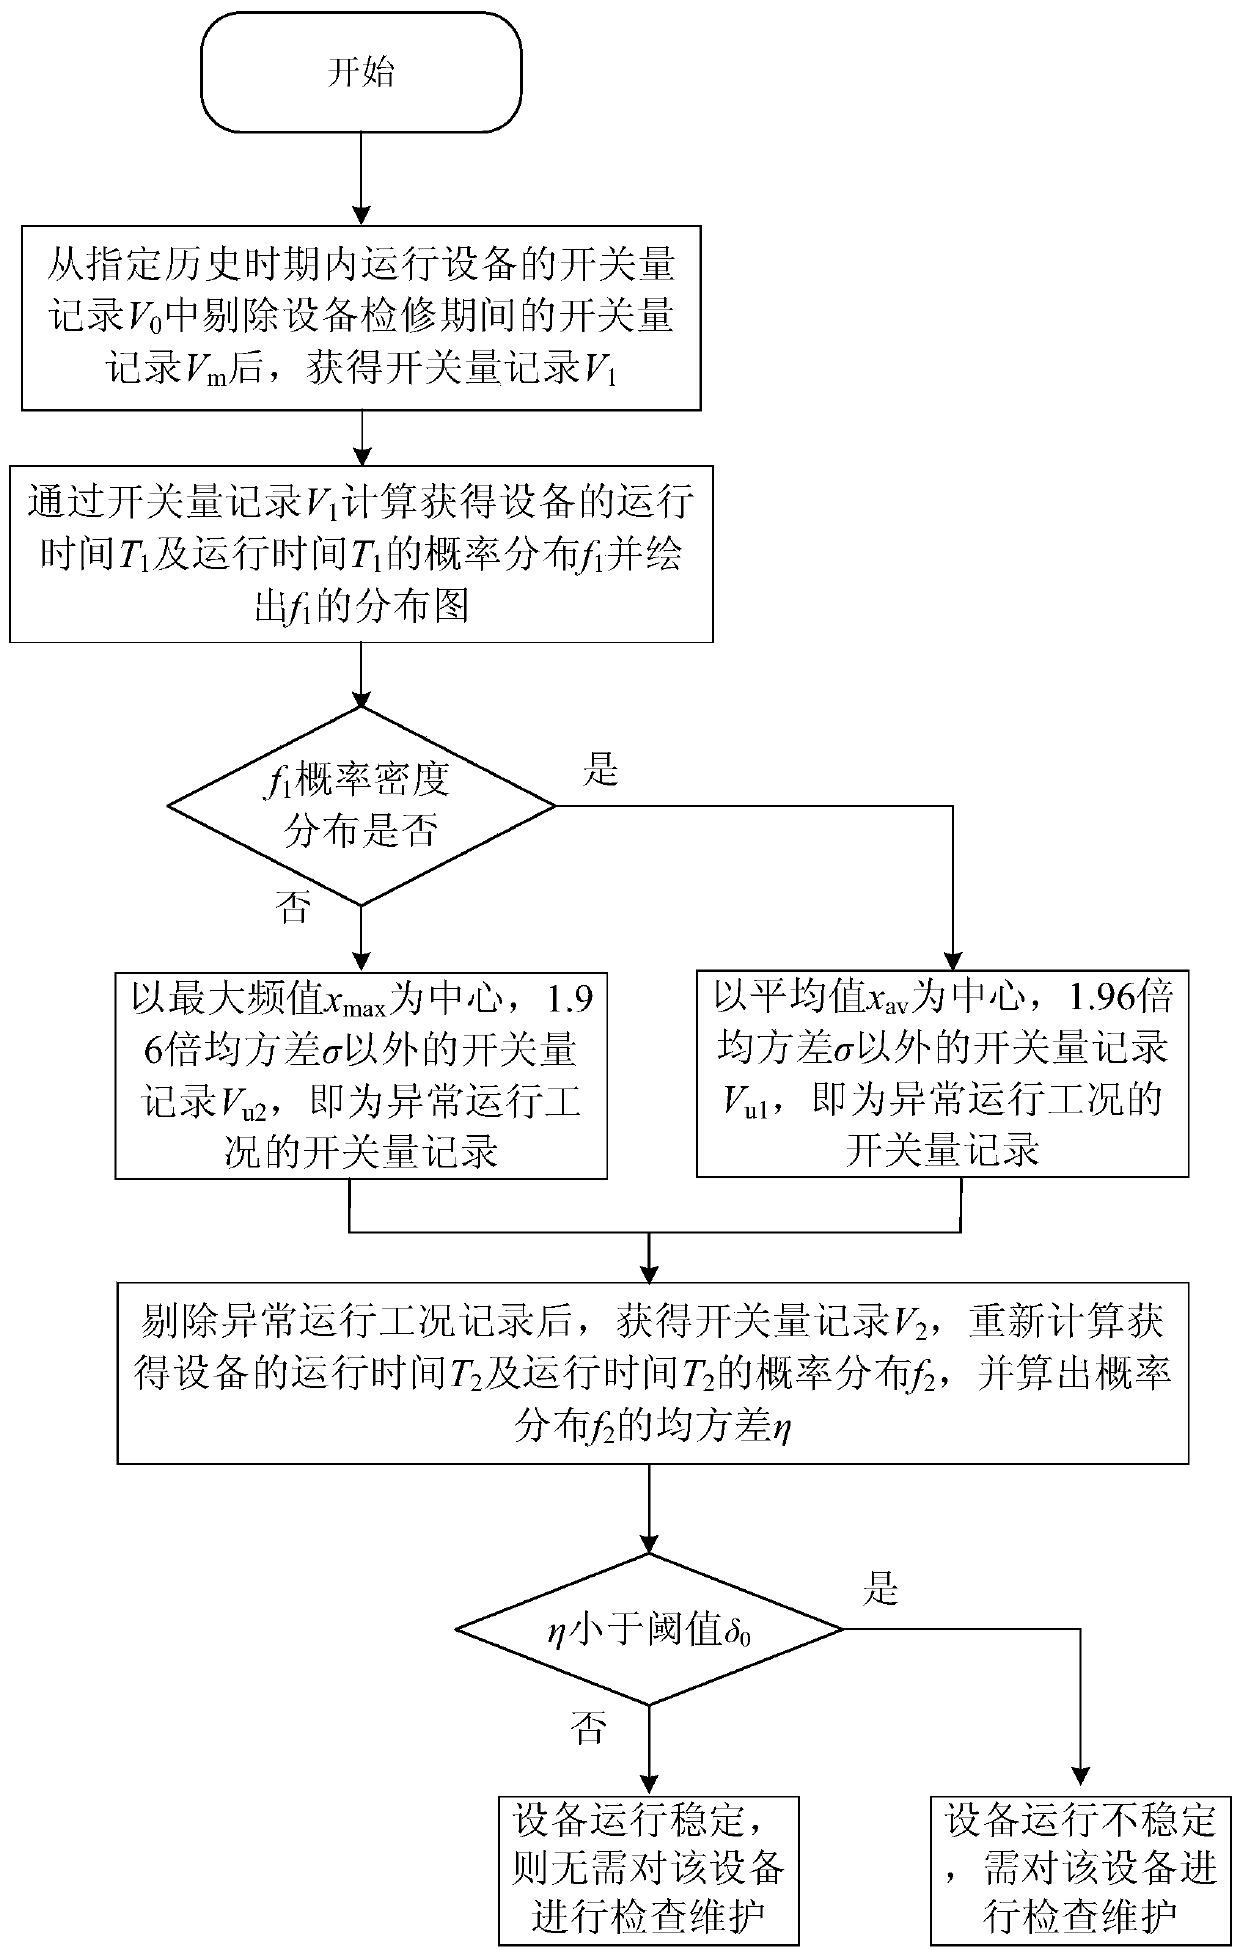 Rapid screening method for abnormal operating conditions of electrical equipment